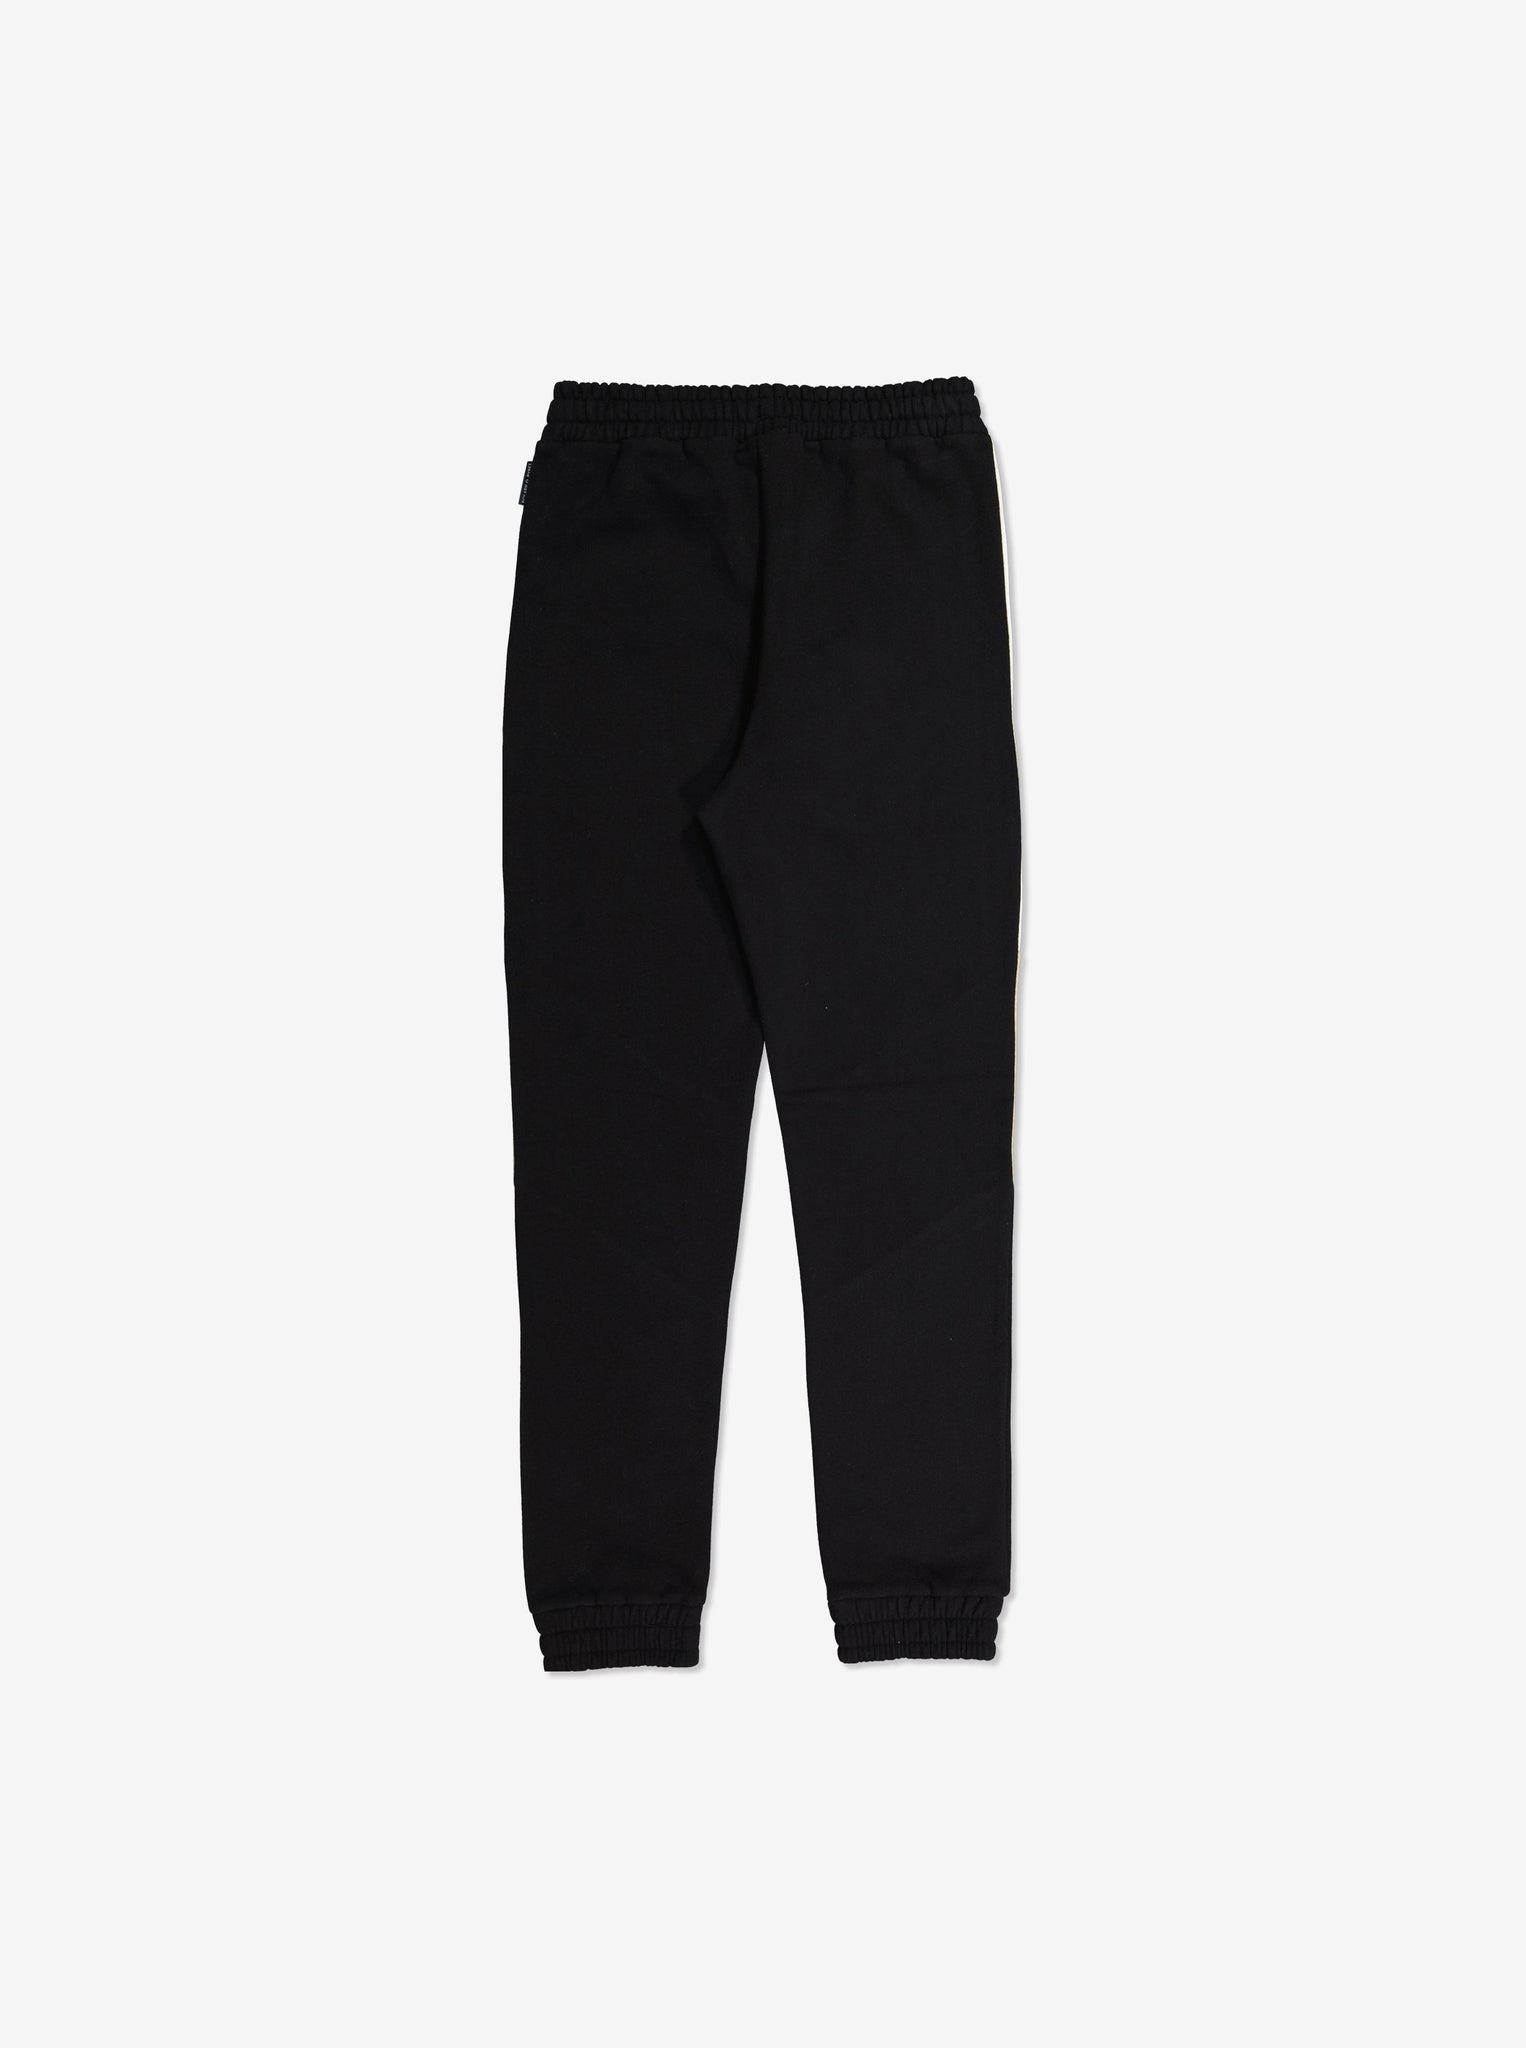  Organic Black Kids Joggers from Polarn O. Pyret Kidswear. Made with 100% organic cotton.